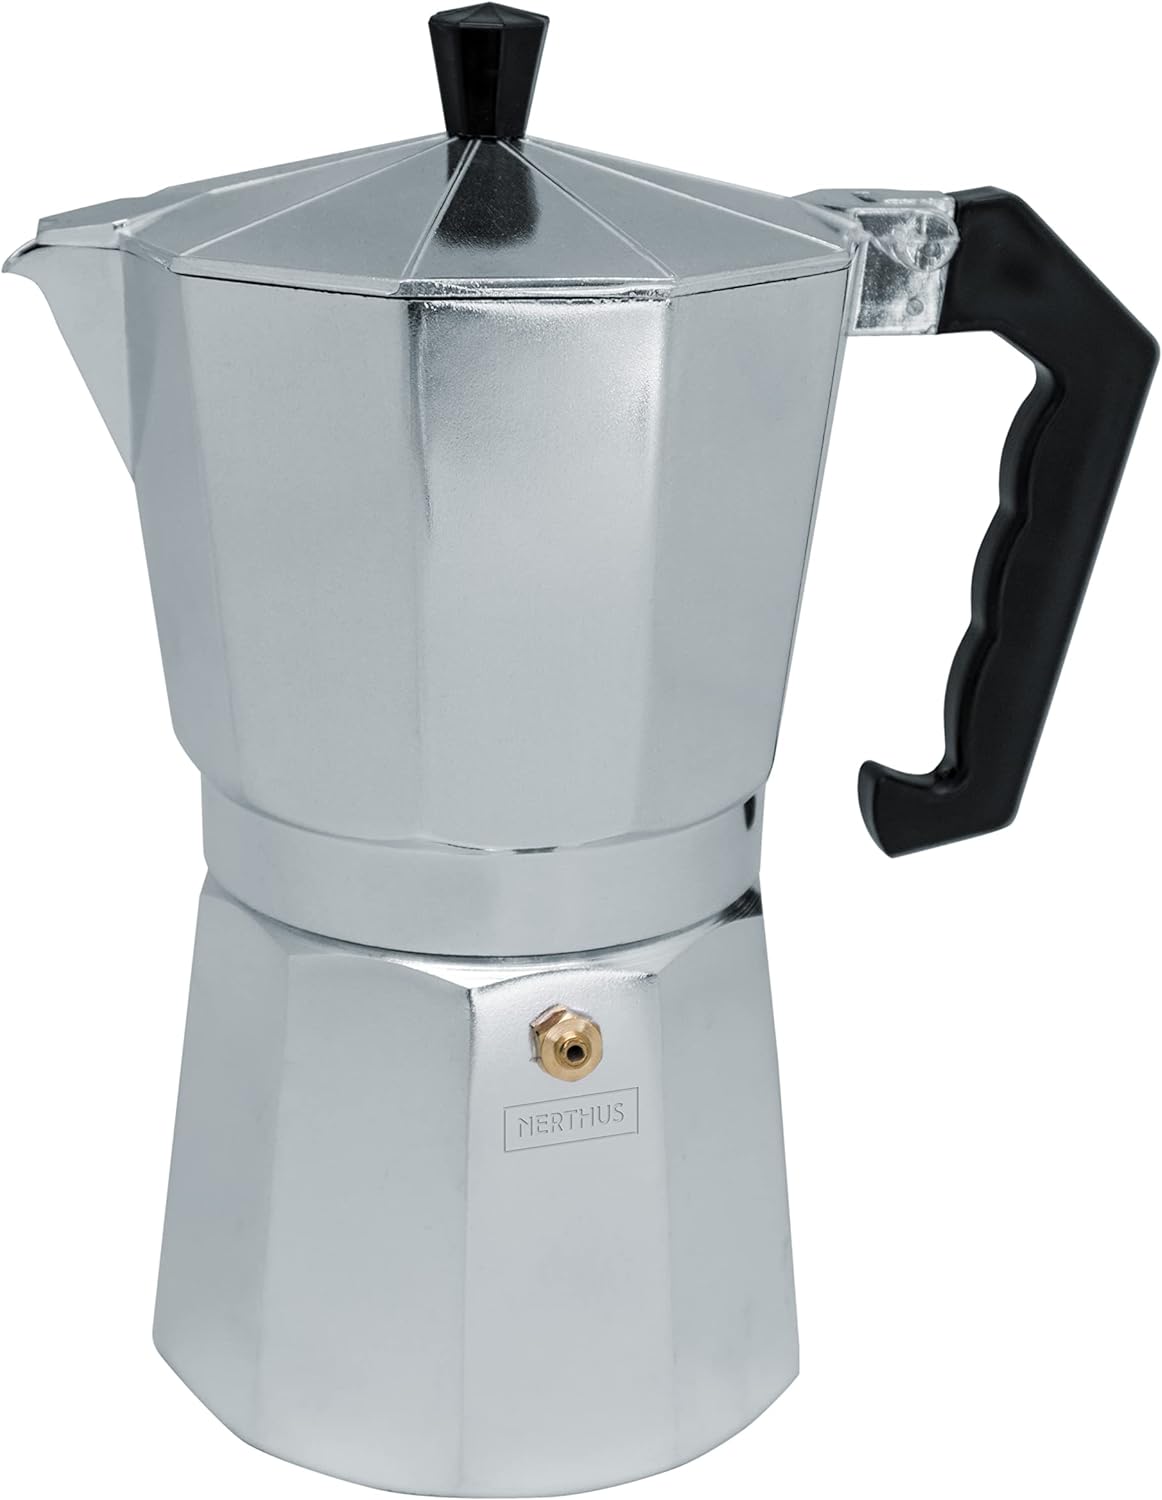 Nerthus fih 834 6-cup induction coffee maker Classic Italian Coffee Maker